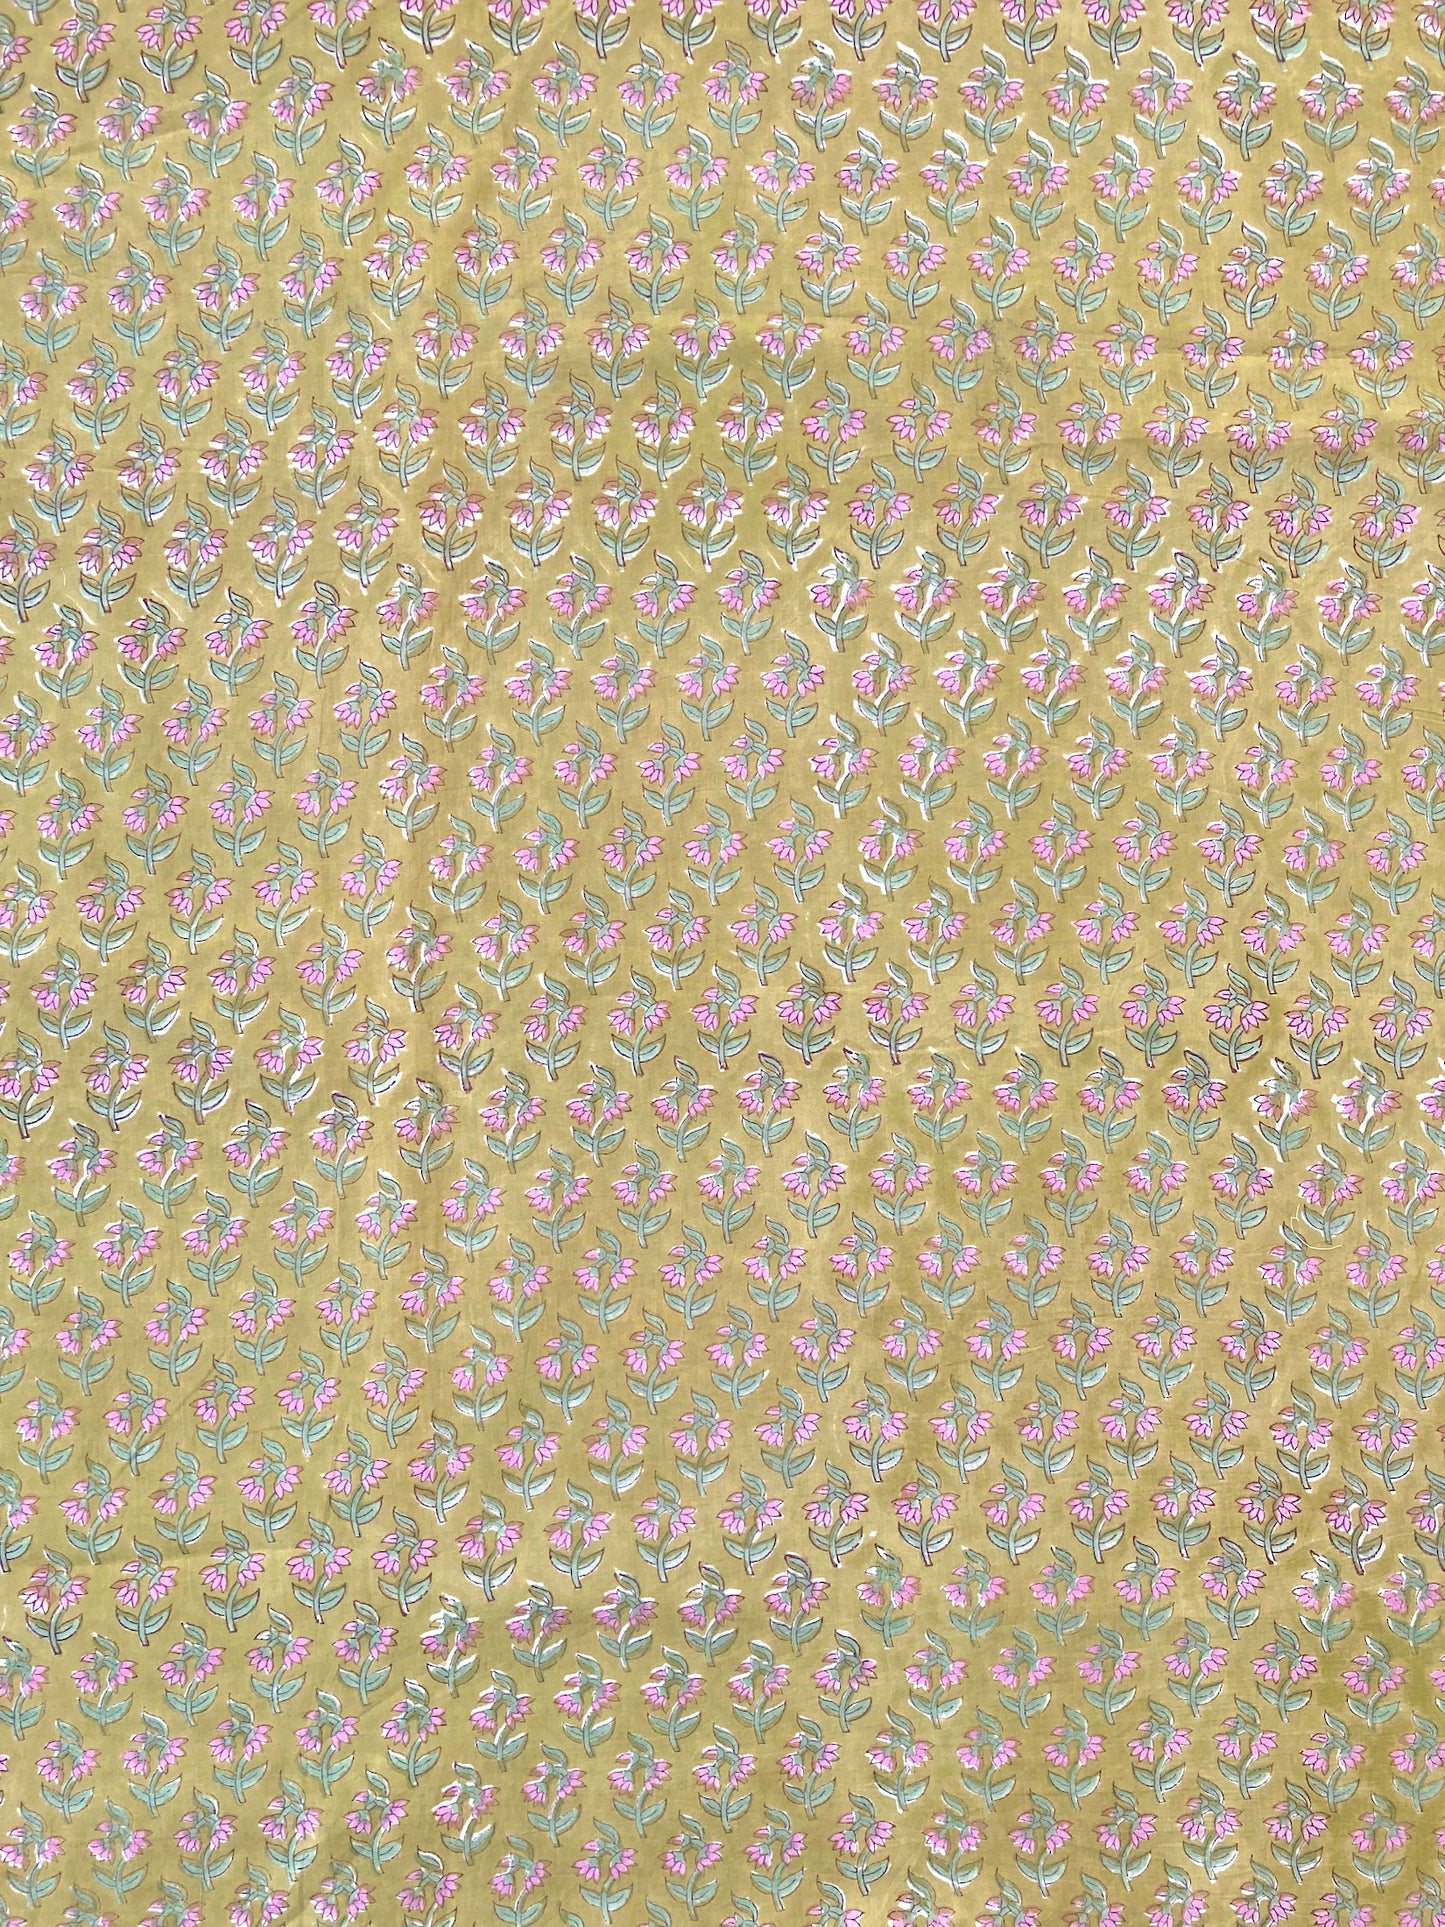 Hand Block Printed Cotton Fabric Olive Green #207-16